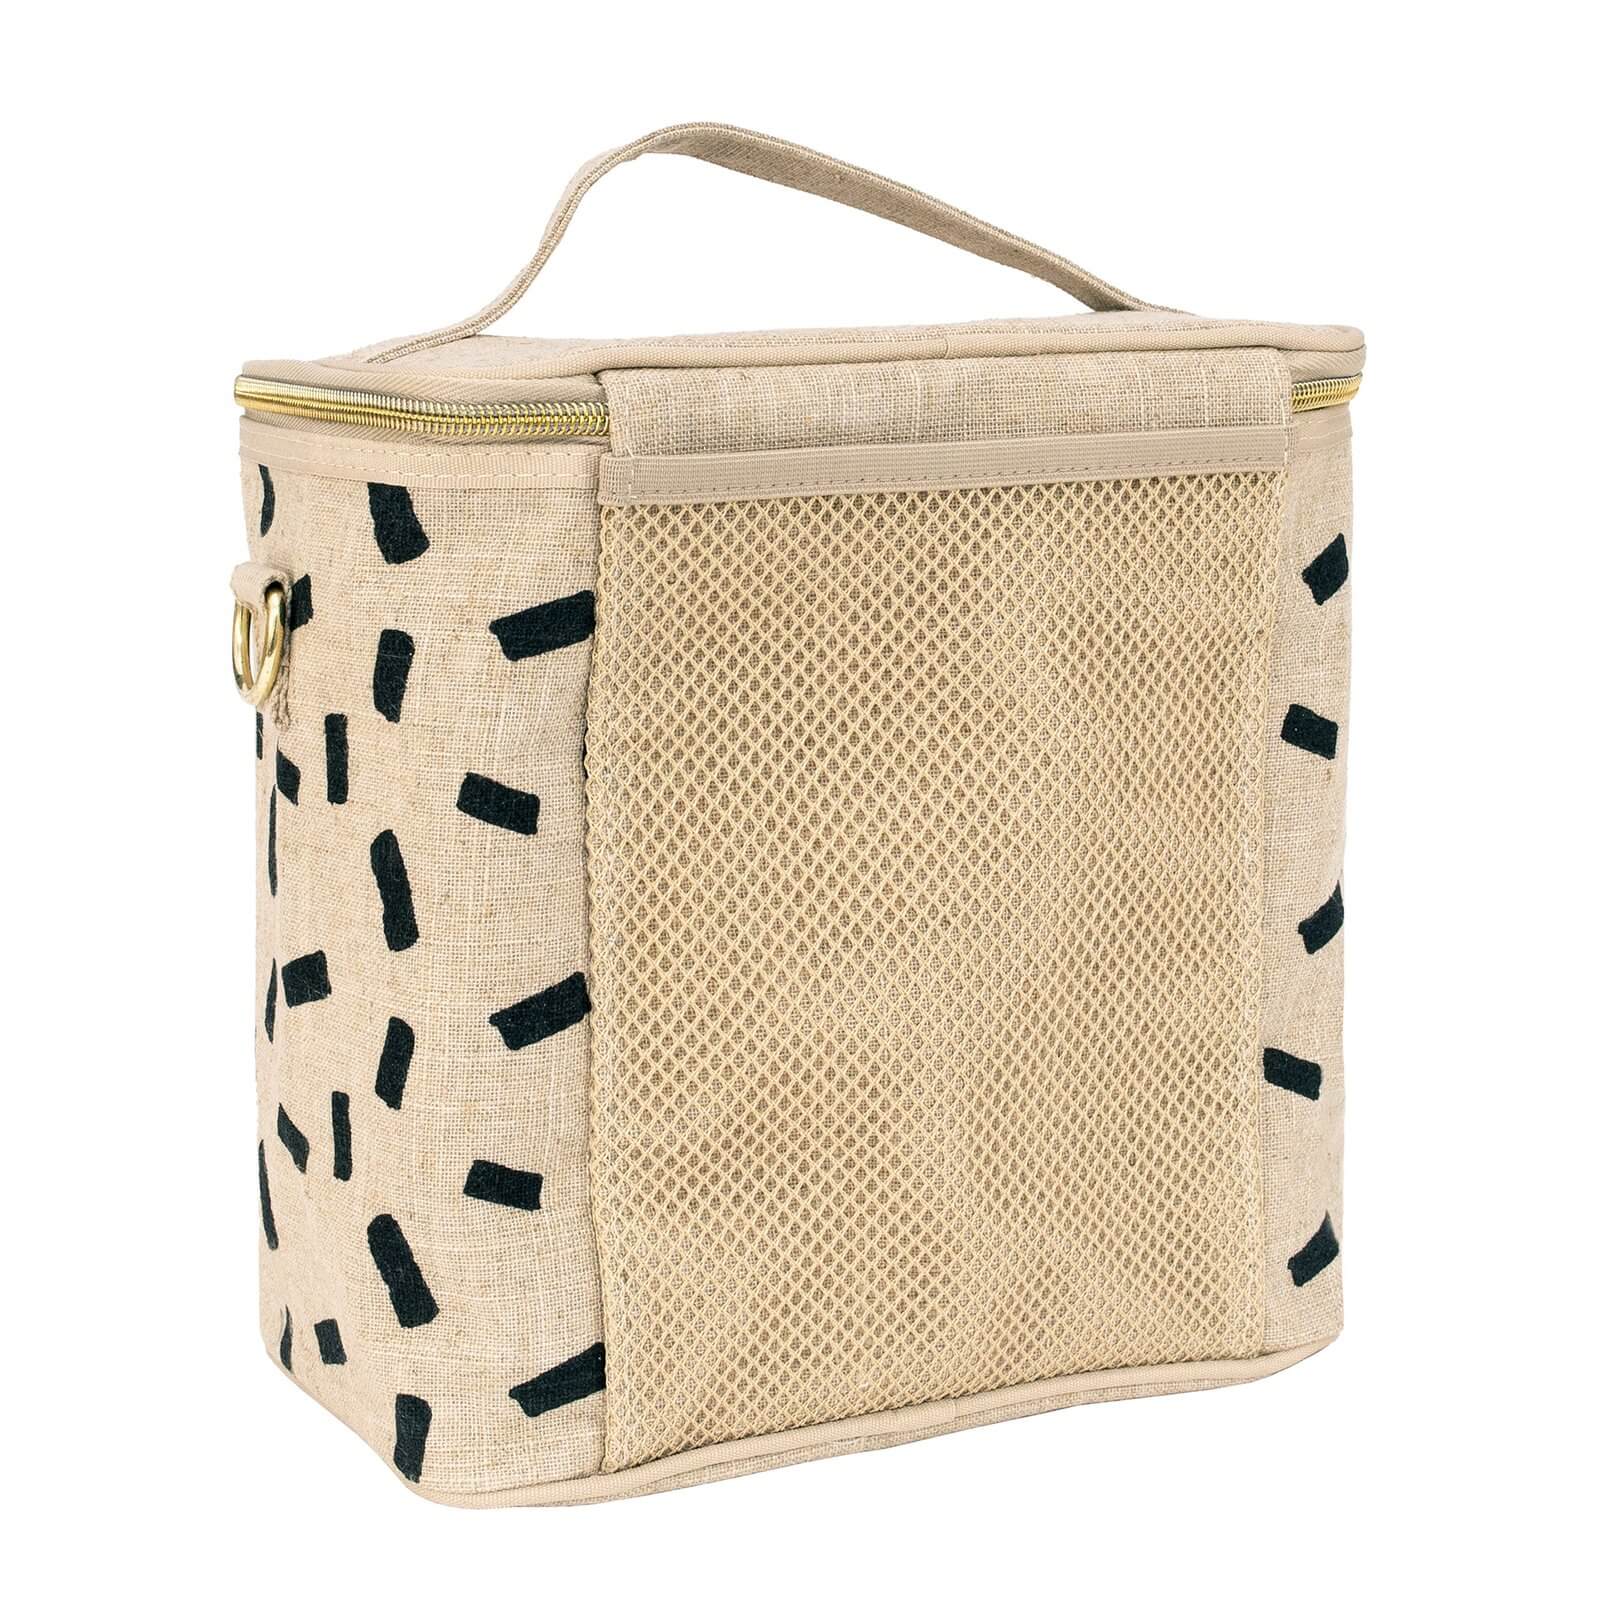 Linen Lunch Poche Bag - Confetti Block - by SoYoung on the go SoYoung Prettycleanshop